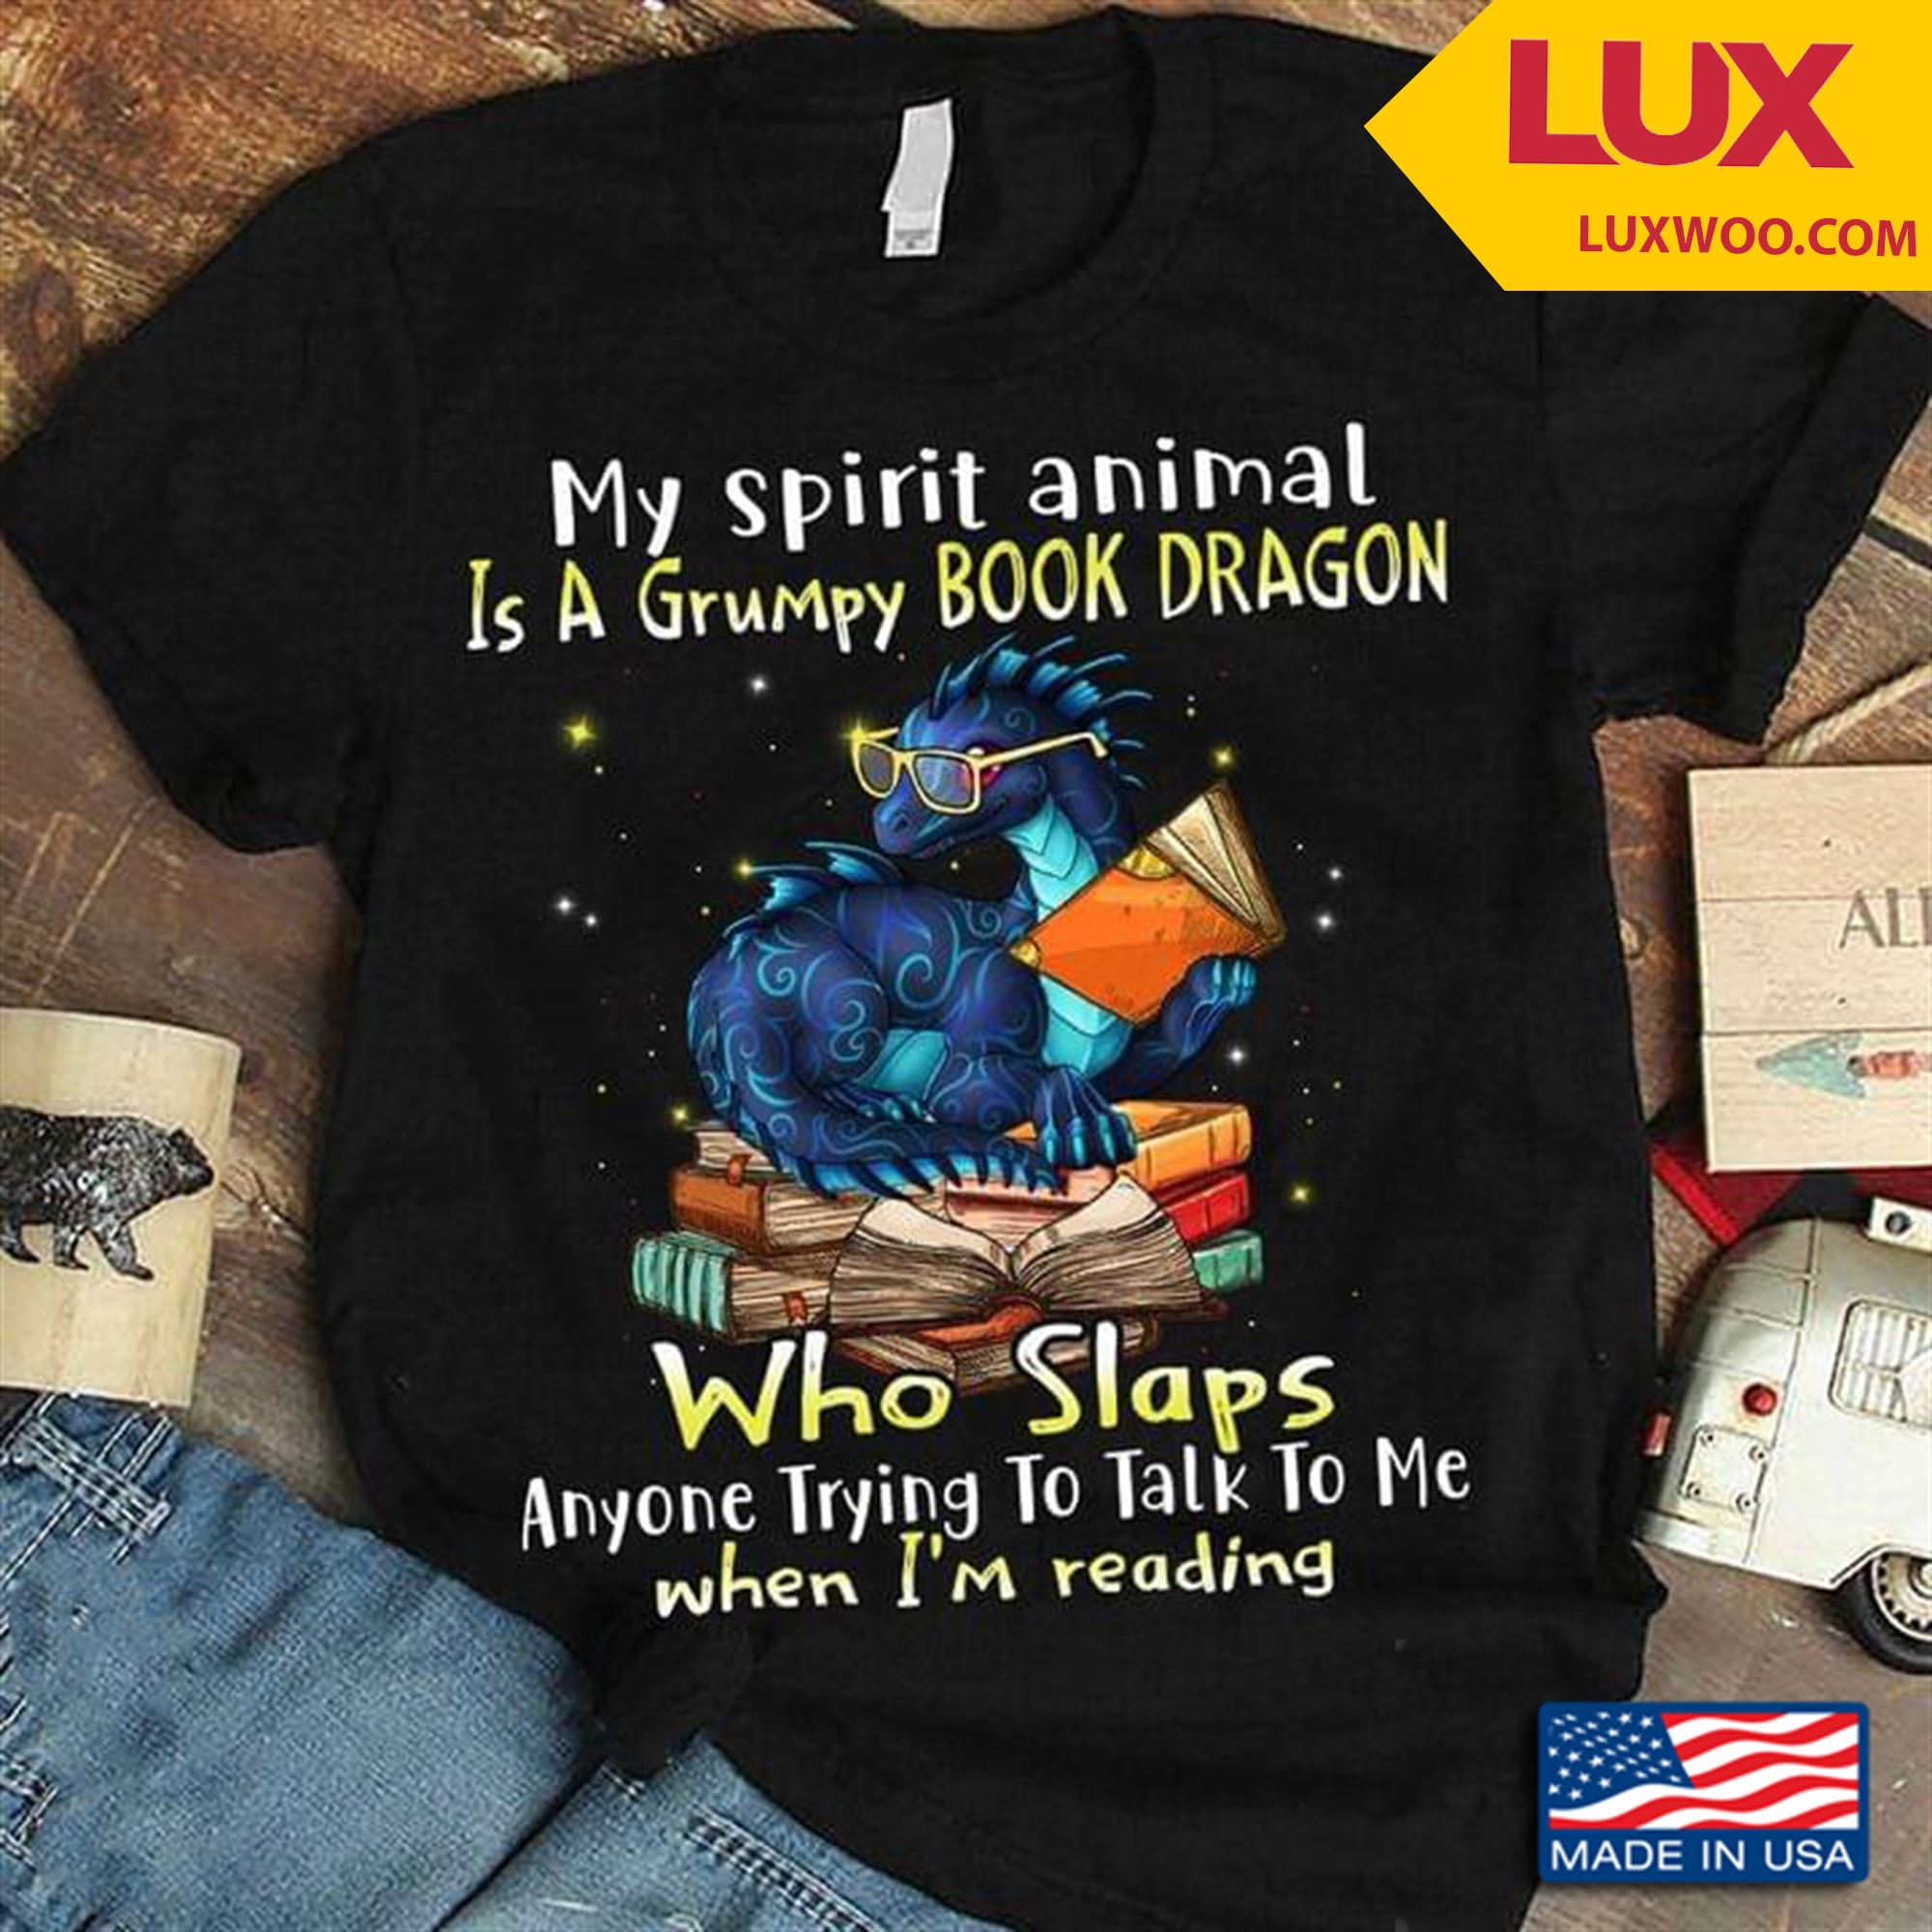 My Sprit Animal Is A Grumpy Book Dragon Who Slaps Anyone Trying To Talk To Me When Im Reading Tshirt Size Up To 5xl